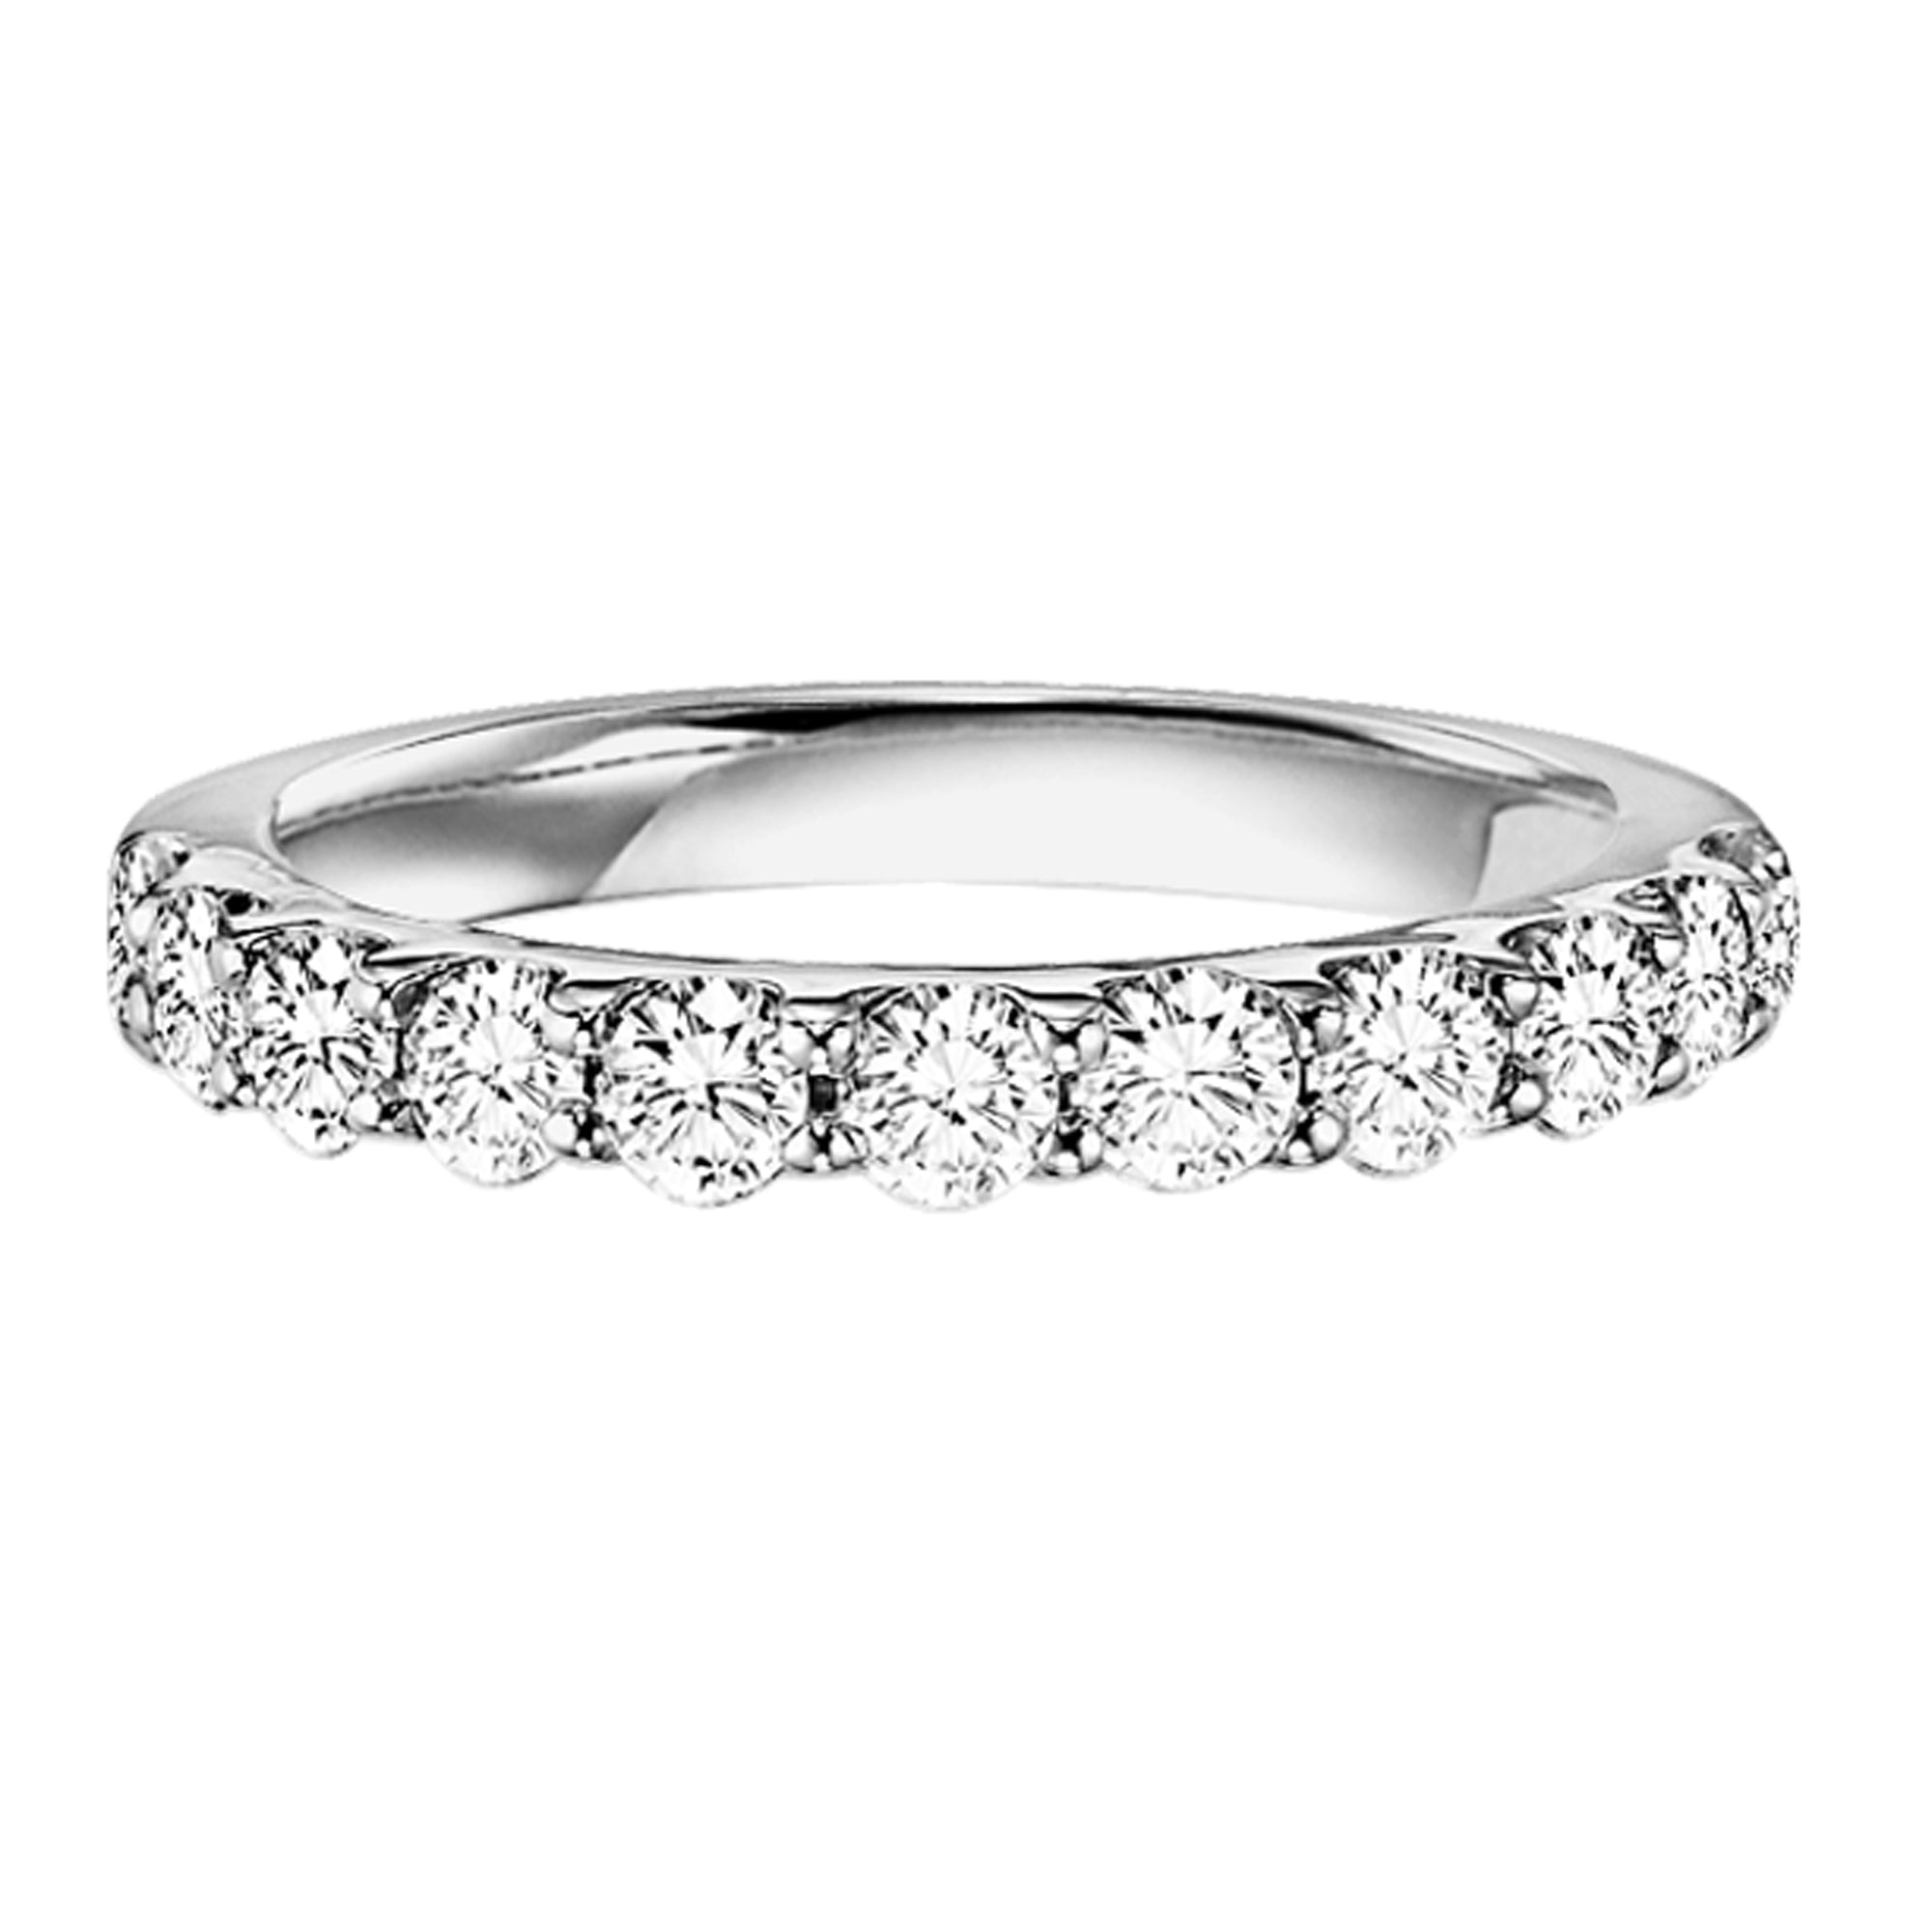 Sterling Silver Cubic Zirconia Ring - AK1028 - Hallmark Jewellers Formby & The Jewellers Bench Widnes